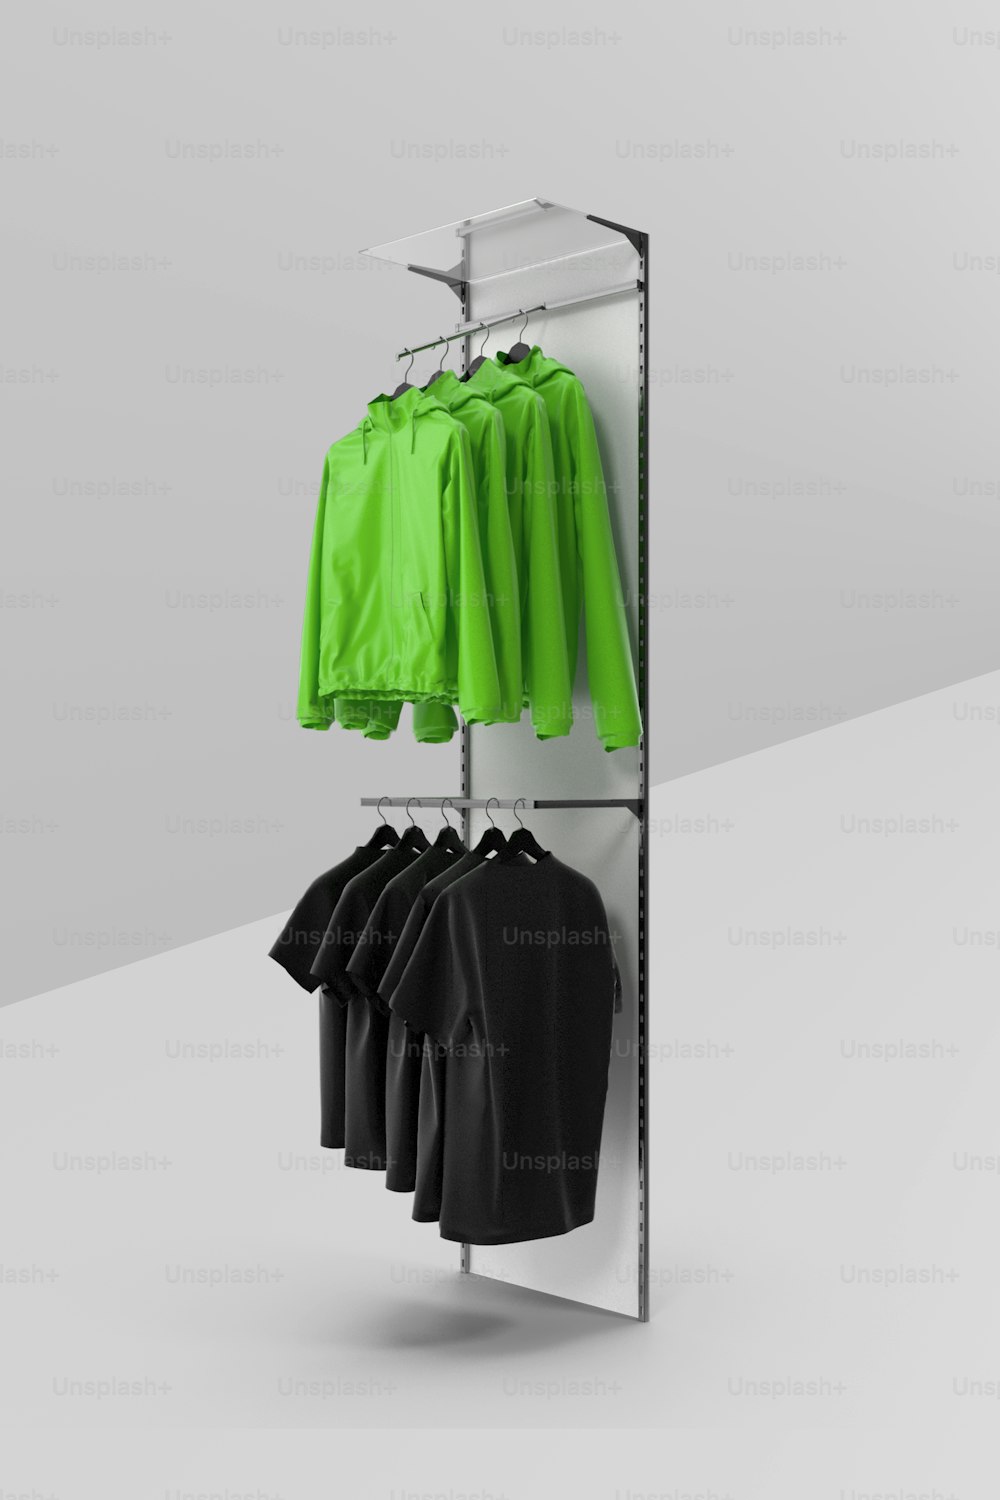 a clothes rack with green and black shirts